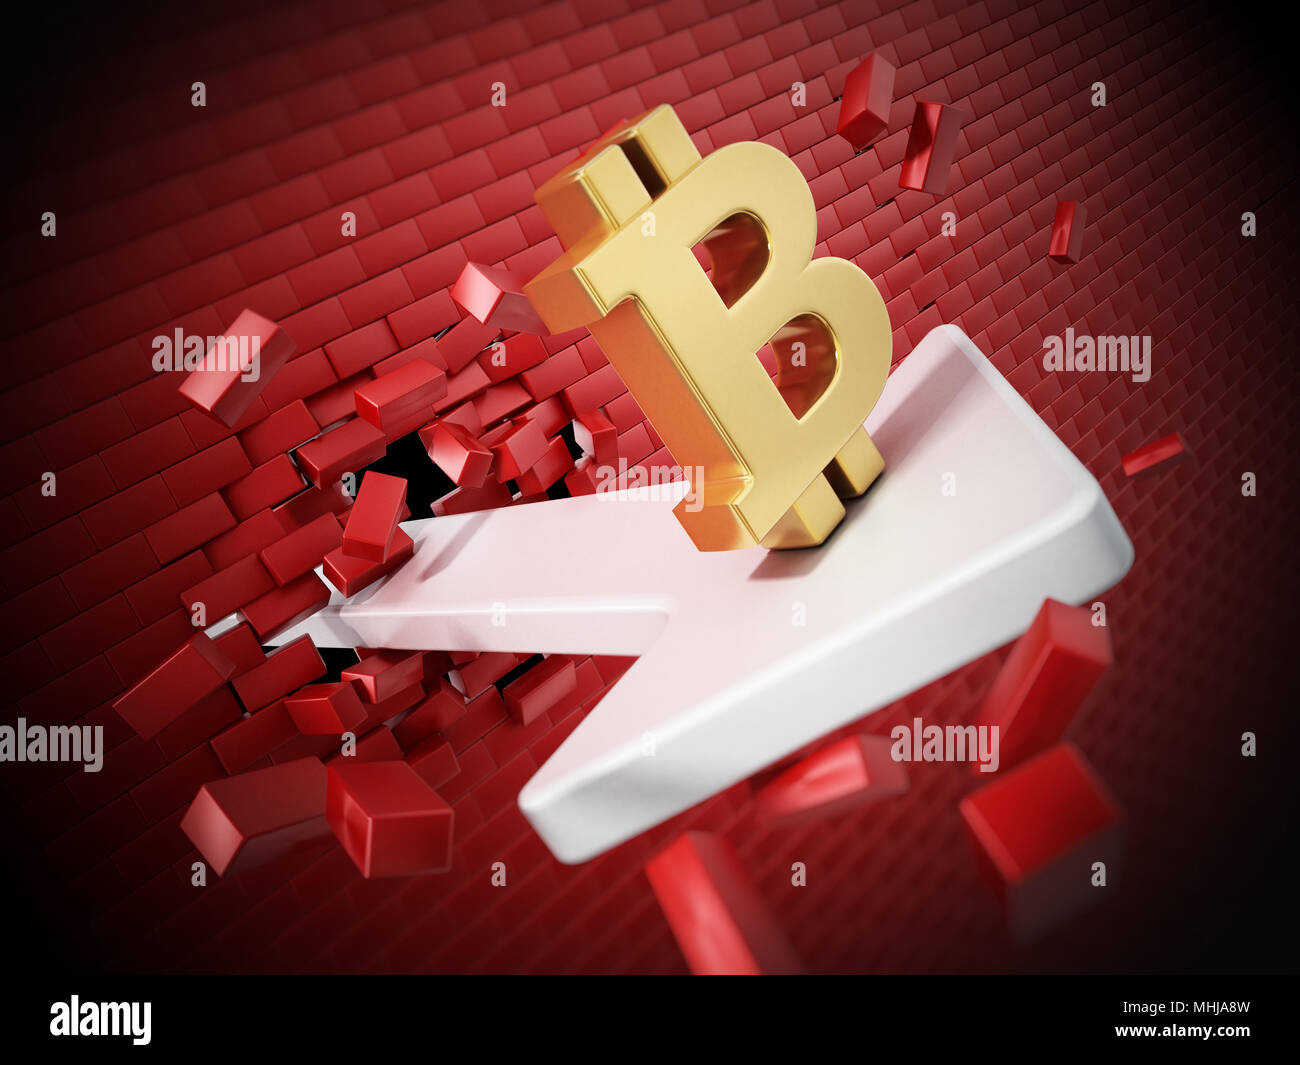 Bitcoin symbol on the arrow destroying the wall. 3D illustration. Stock Photo